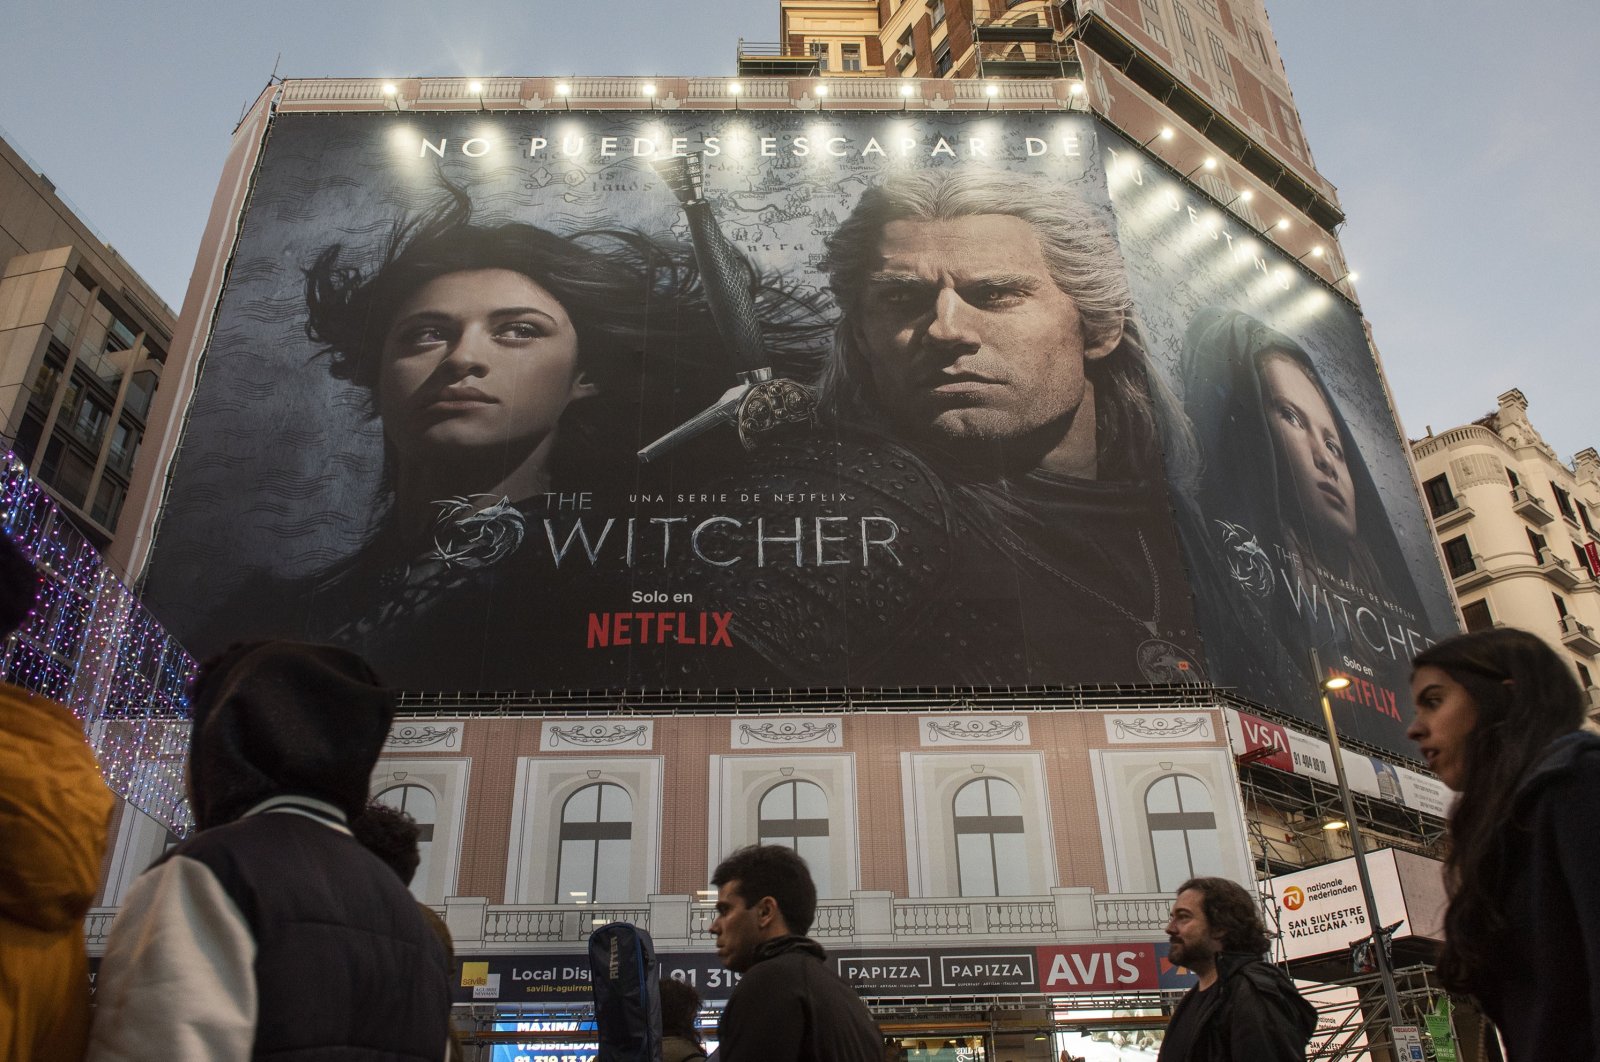 An advertisement for the streaming Netflix's TV series "The Witcher," can be seen on the side of a building, in Spain, Jan. 9, 2020. (Getty Images)